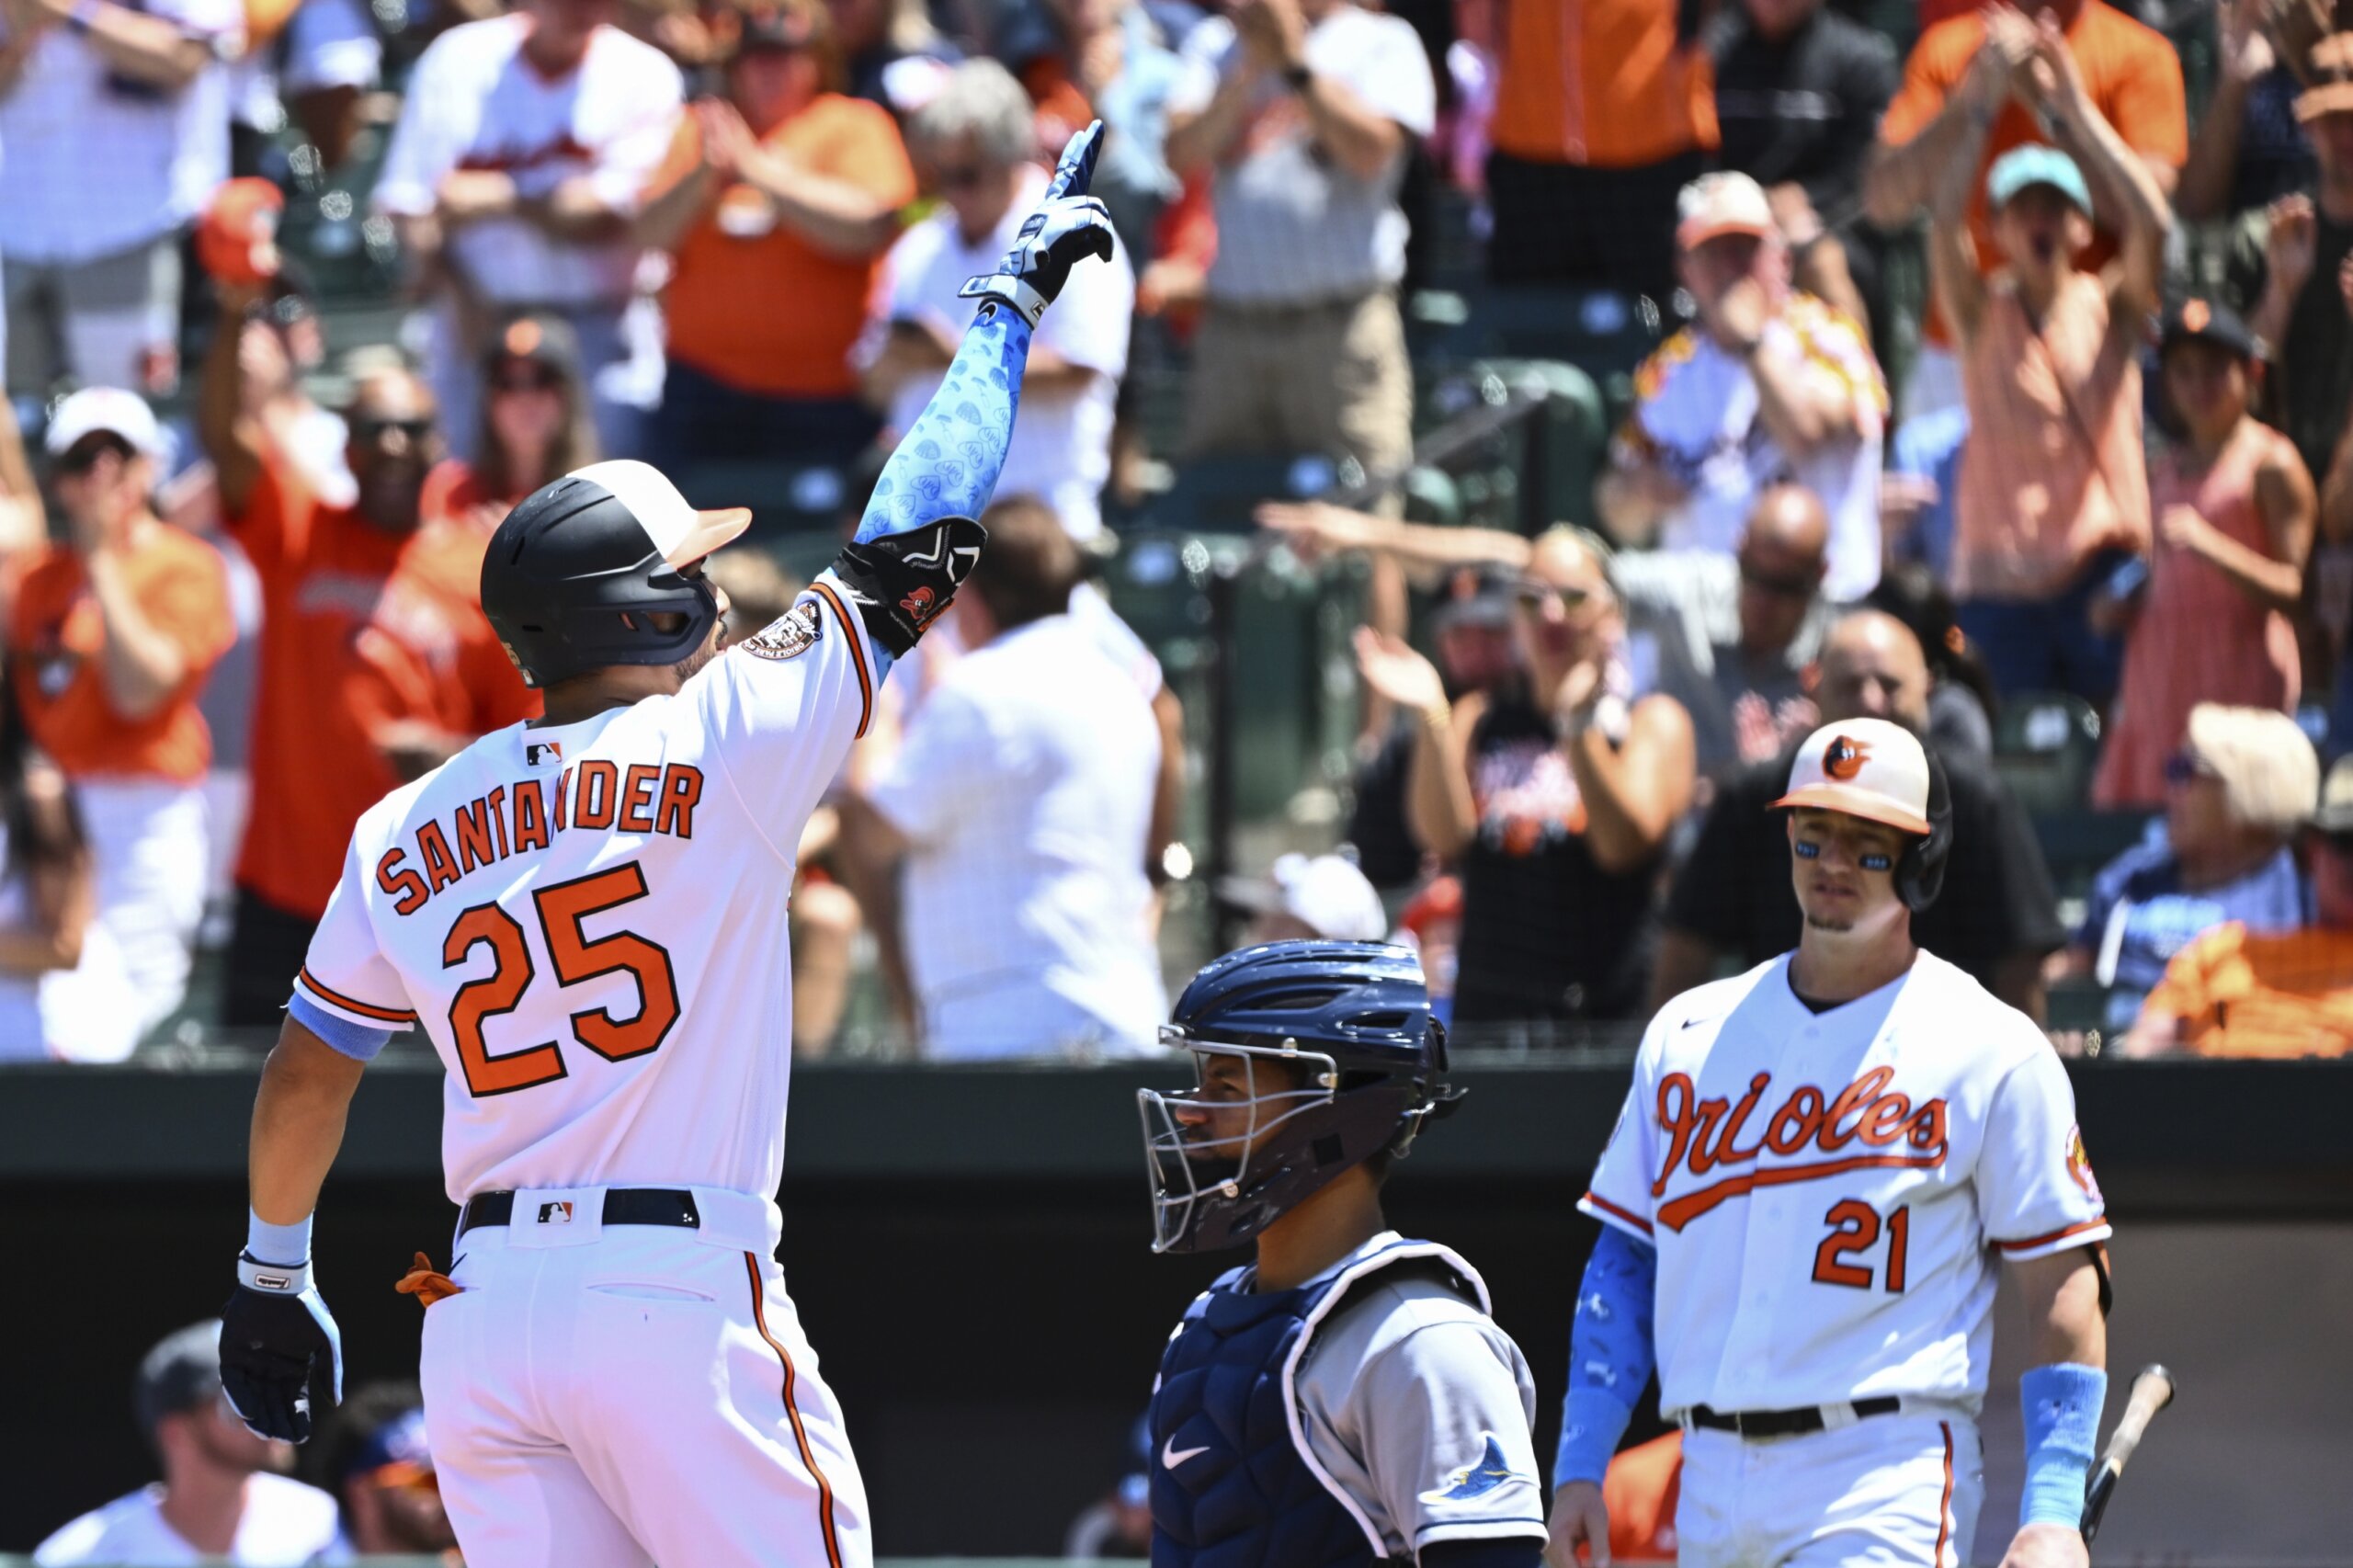 After charmed season in Charm City, Orioles ready for playoff baseball's  return to Baltimore, Sports